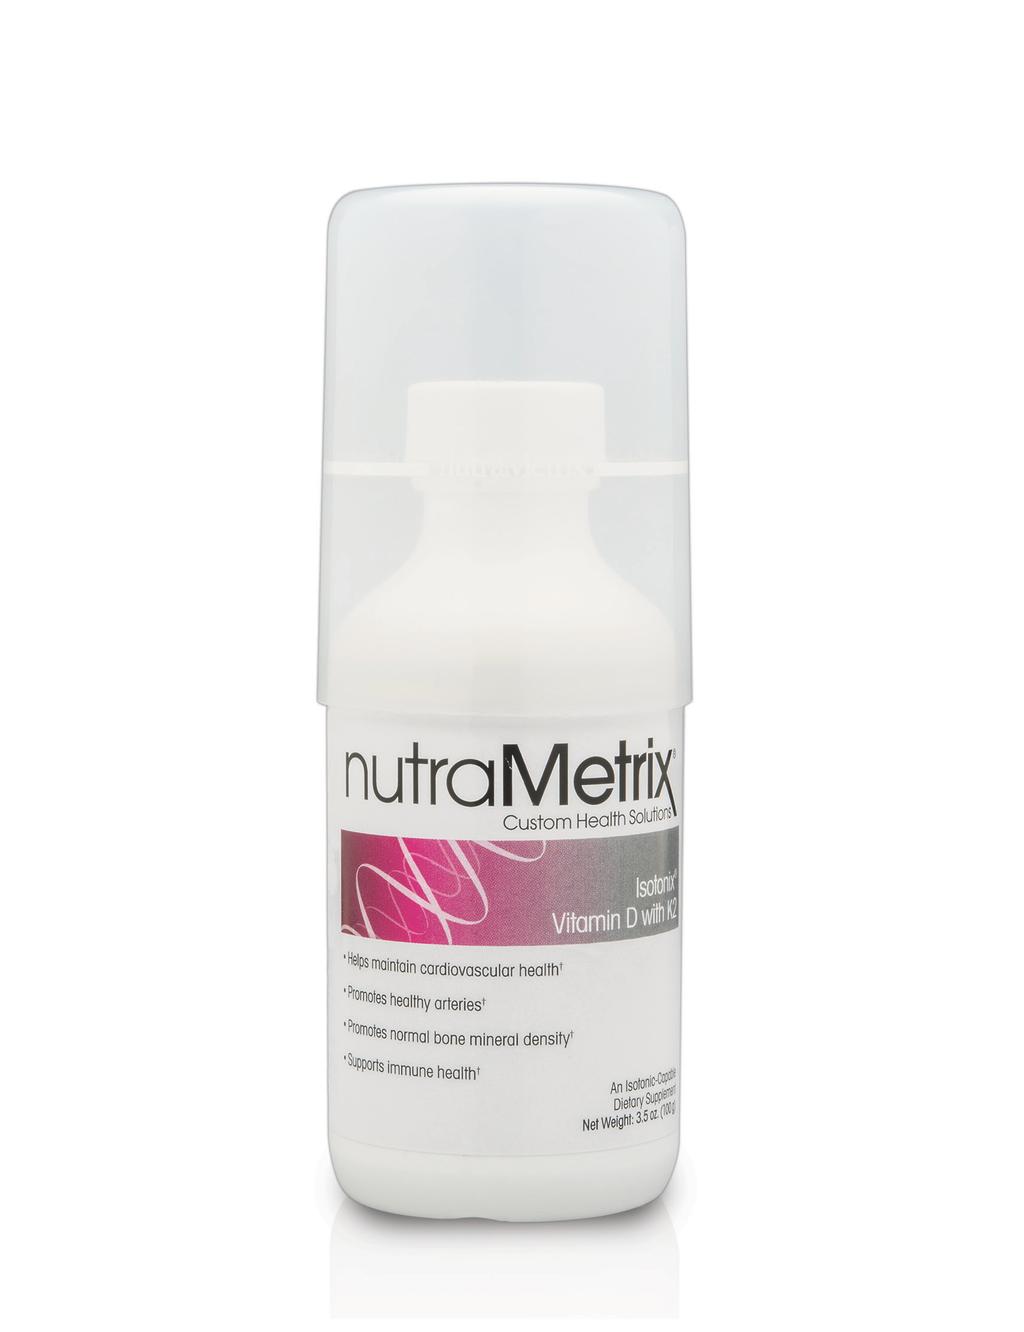 nutrametrix Isotonix Vitamin D with K2 Promotes normal bone mineral density Helps maintain bone mass by supporting normal osteoclast activity Individuals with low bone